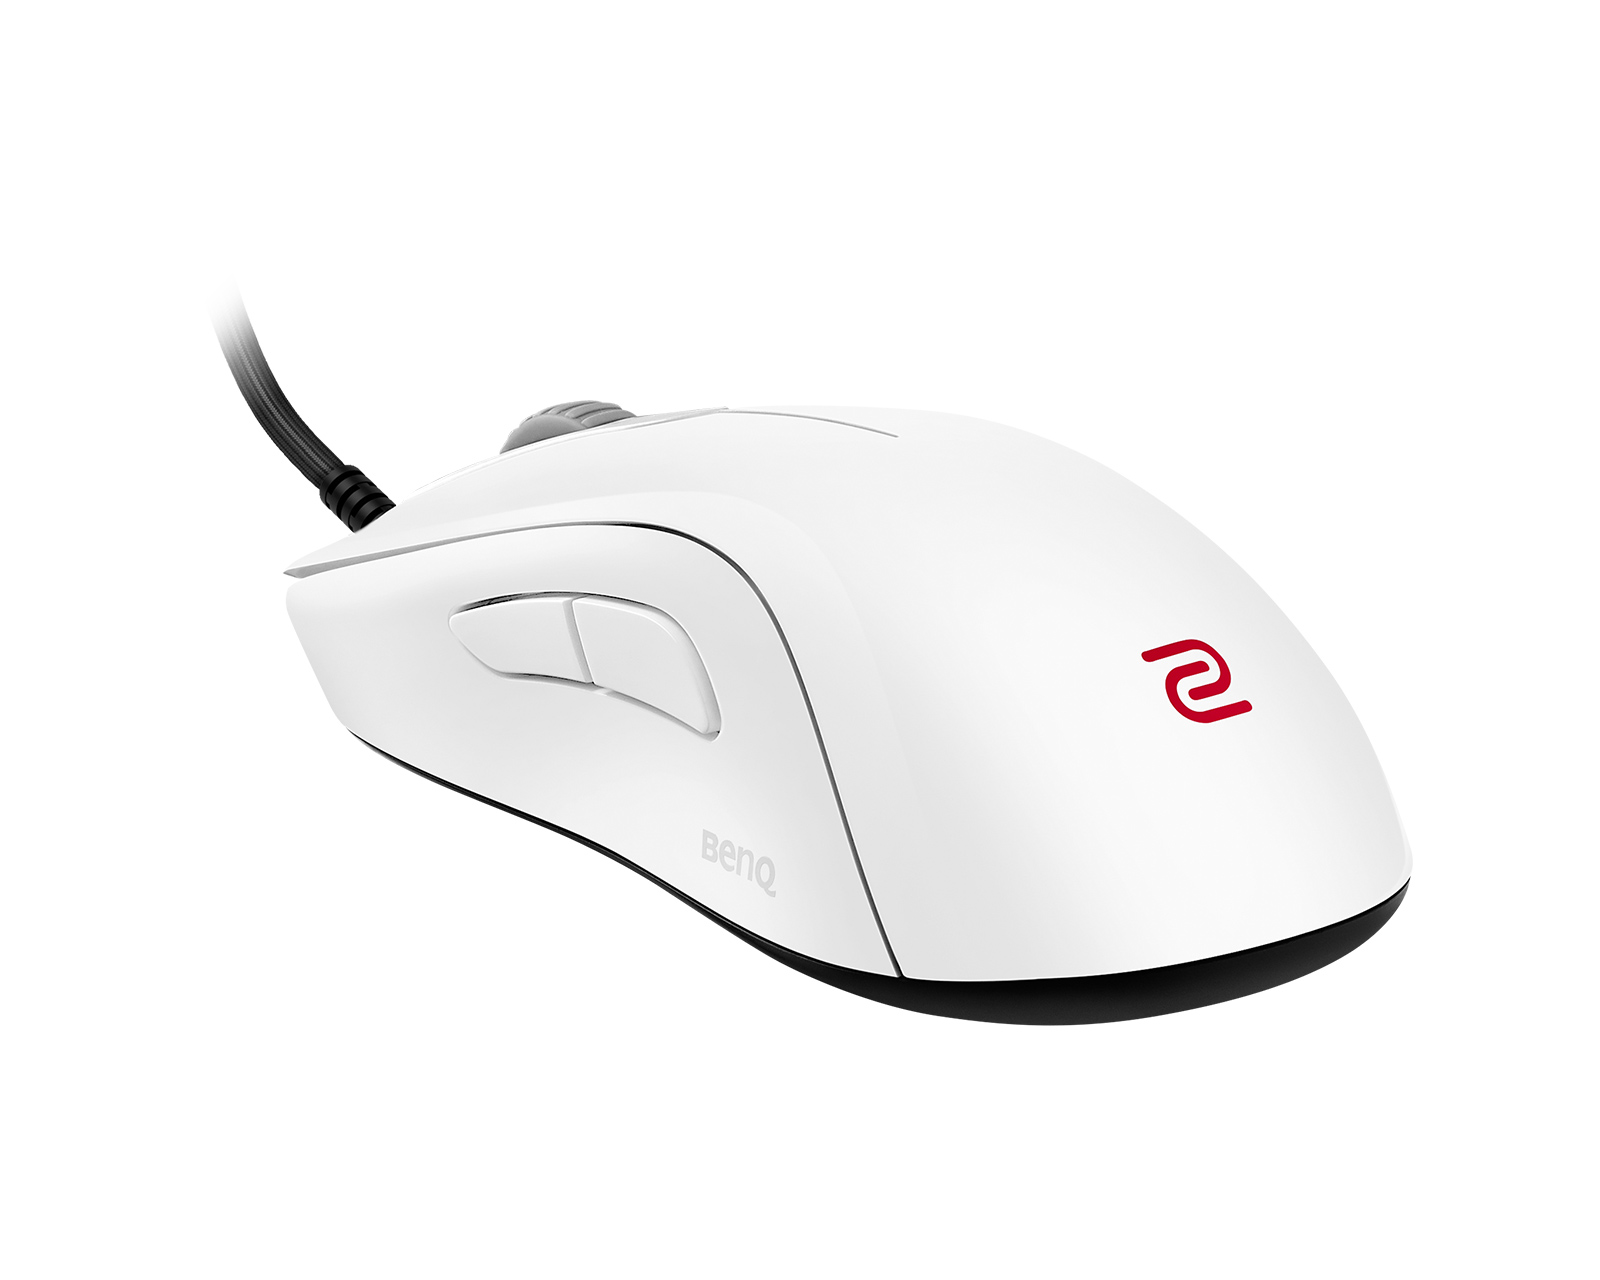 ZOWIE by BenQ S1-B V2 White Special Edition - Gaming Mouse (Limited Edition)